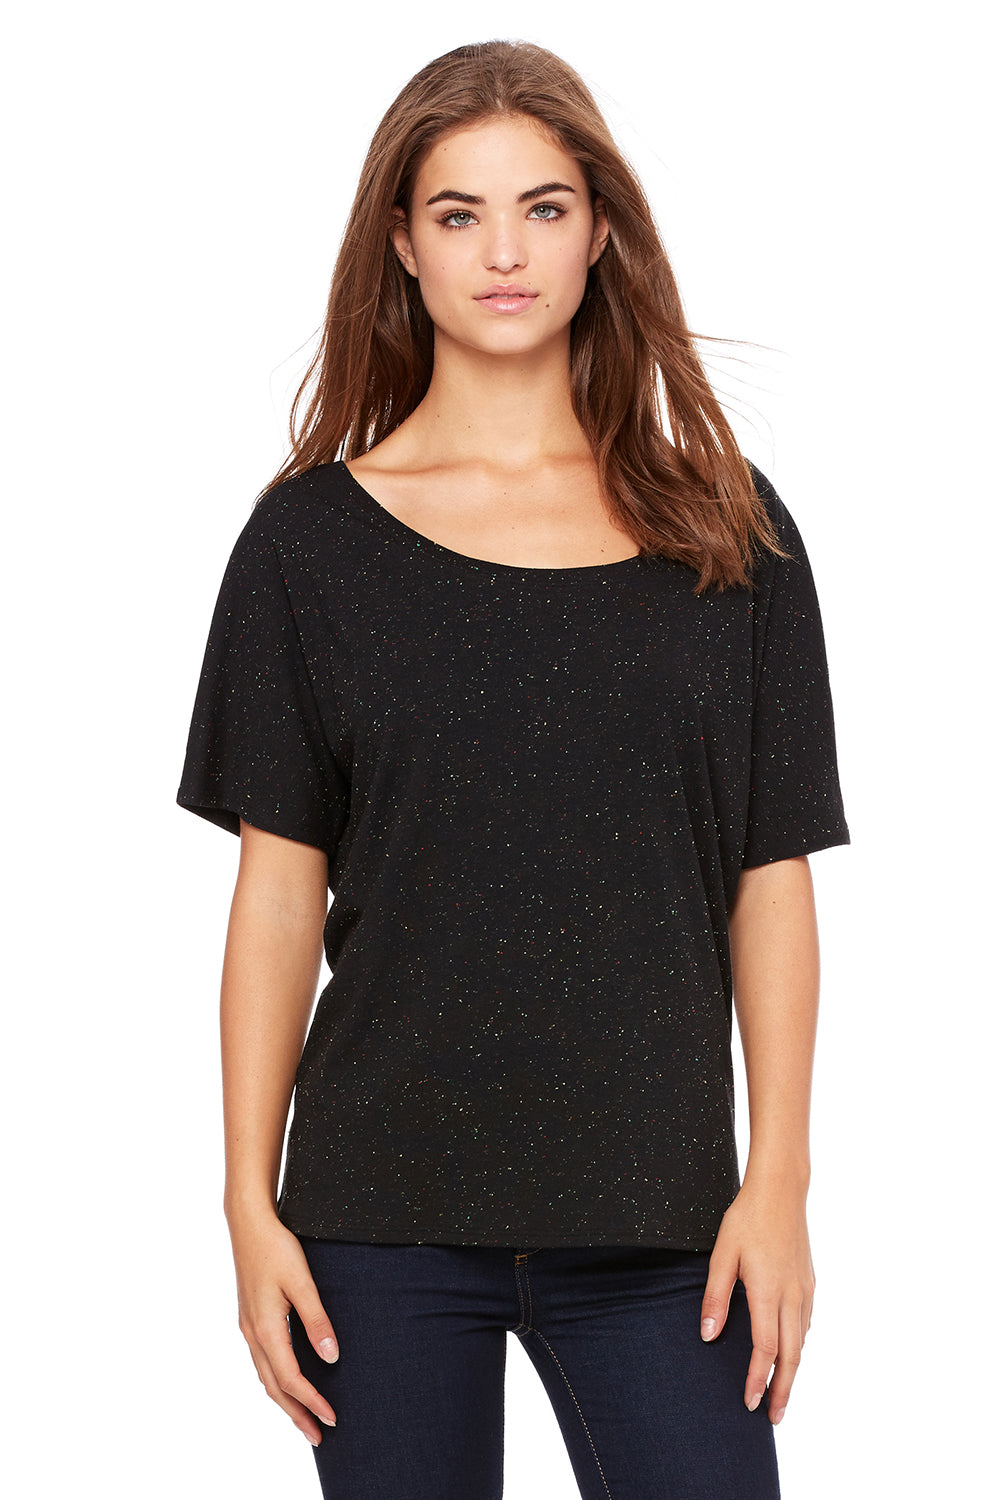 Bella + Canvas BC8816/8816 Womens Slouchy Short Sleeve Wide Neck T-Shirt Black Speckled Model Front